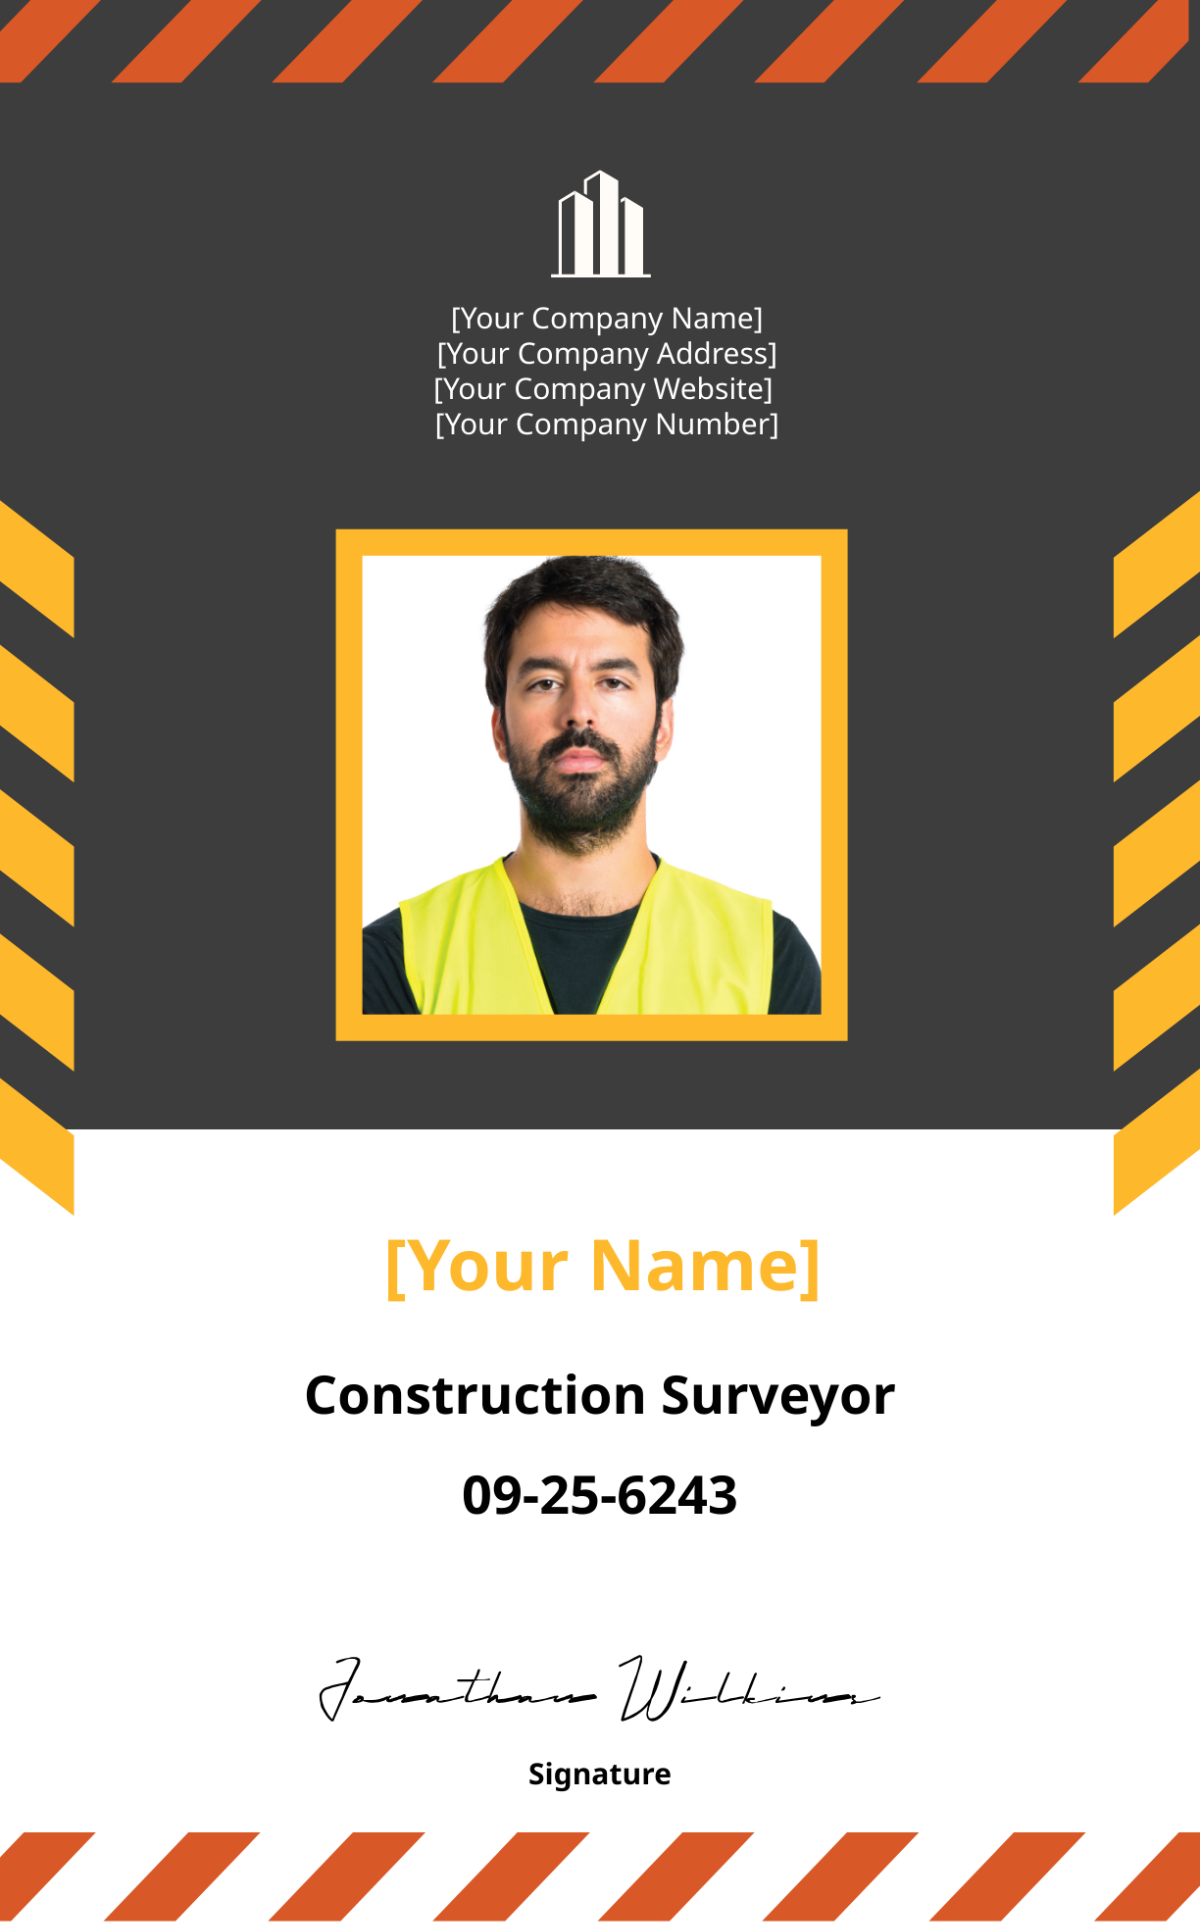 Infrastructure Construction ID Card Template